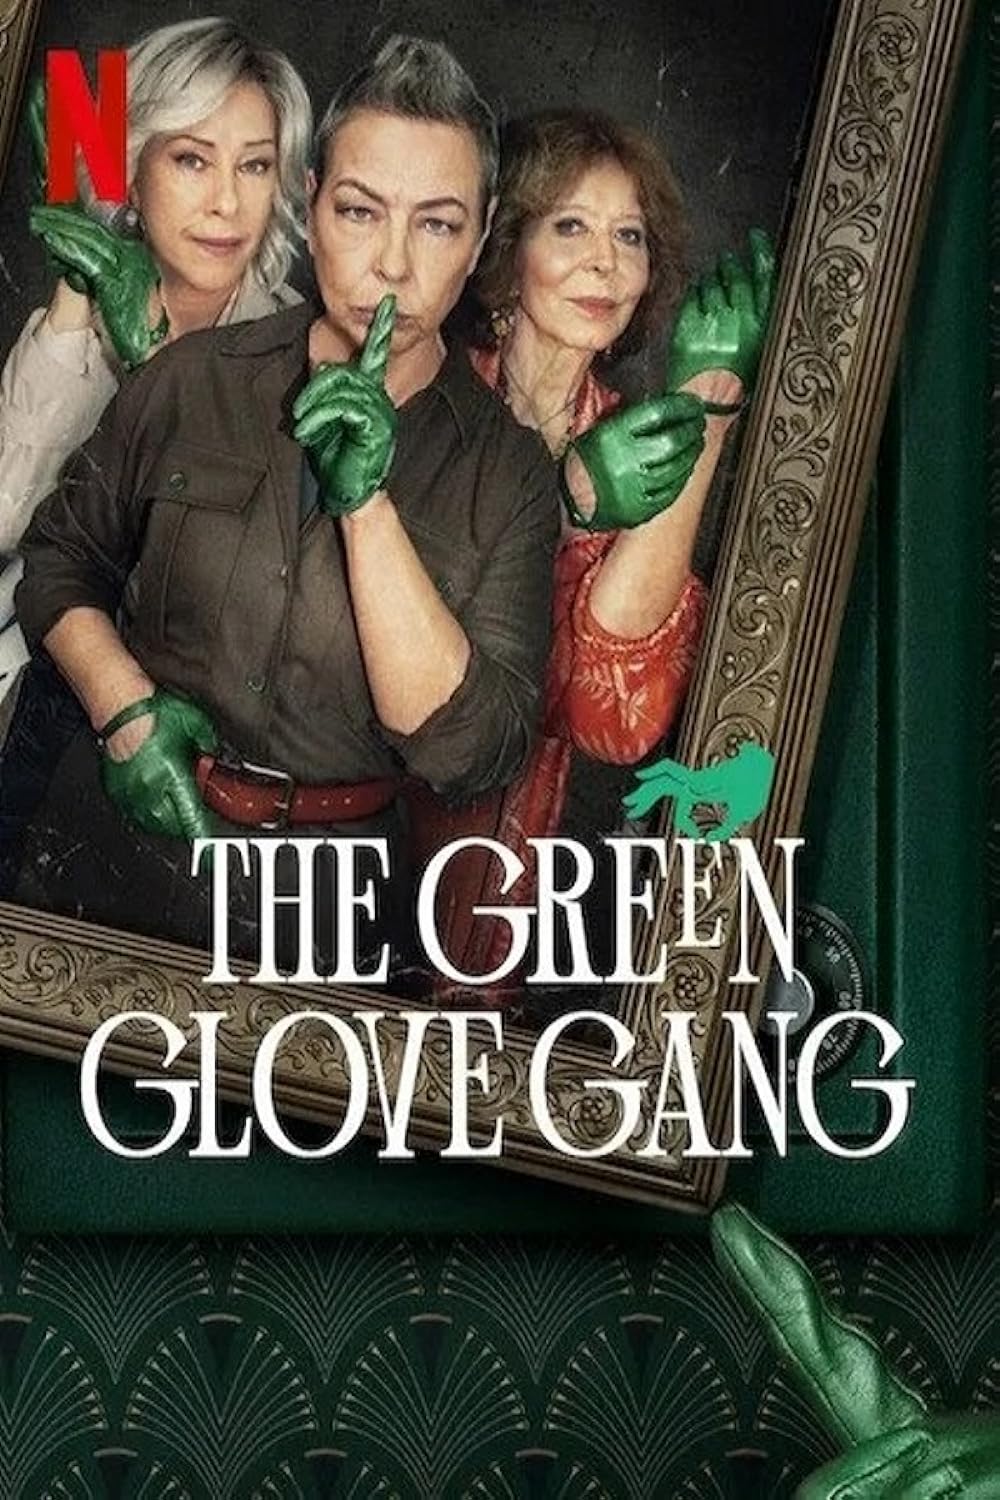 The Green Glove Gang (S01 - S02)